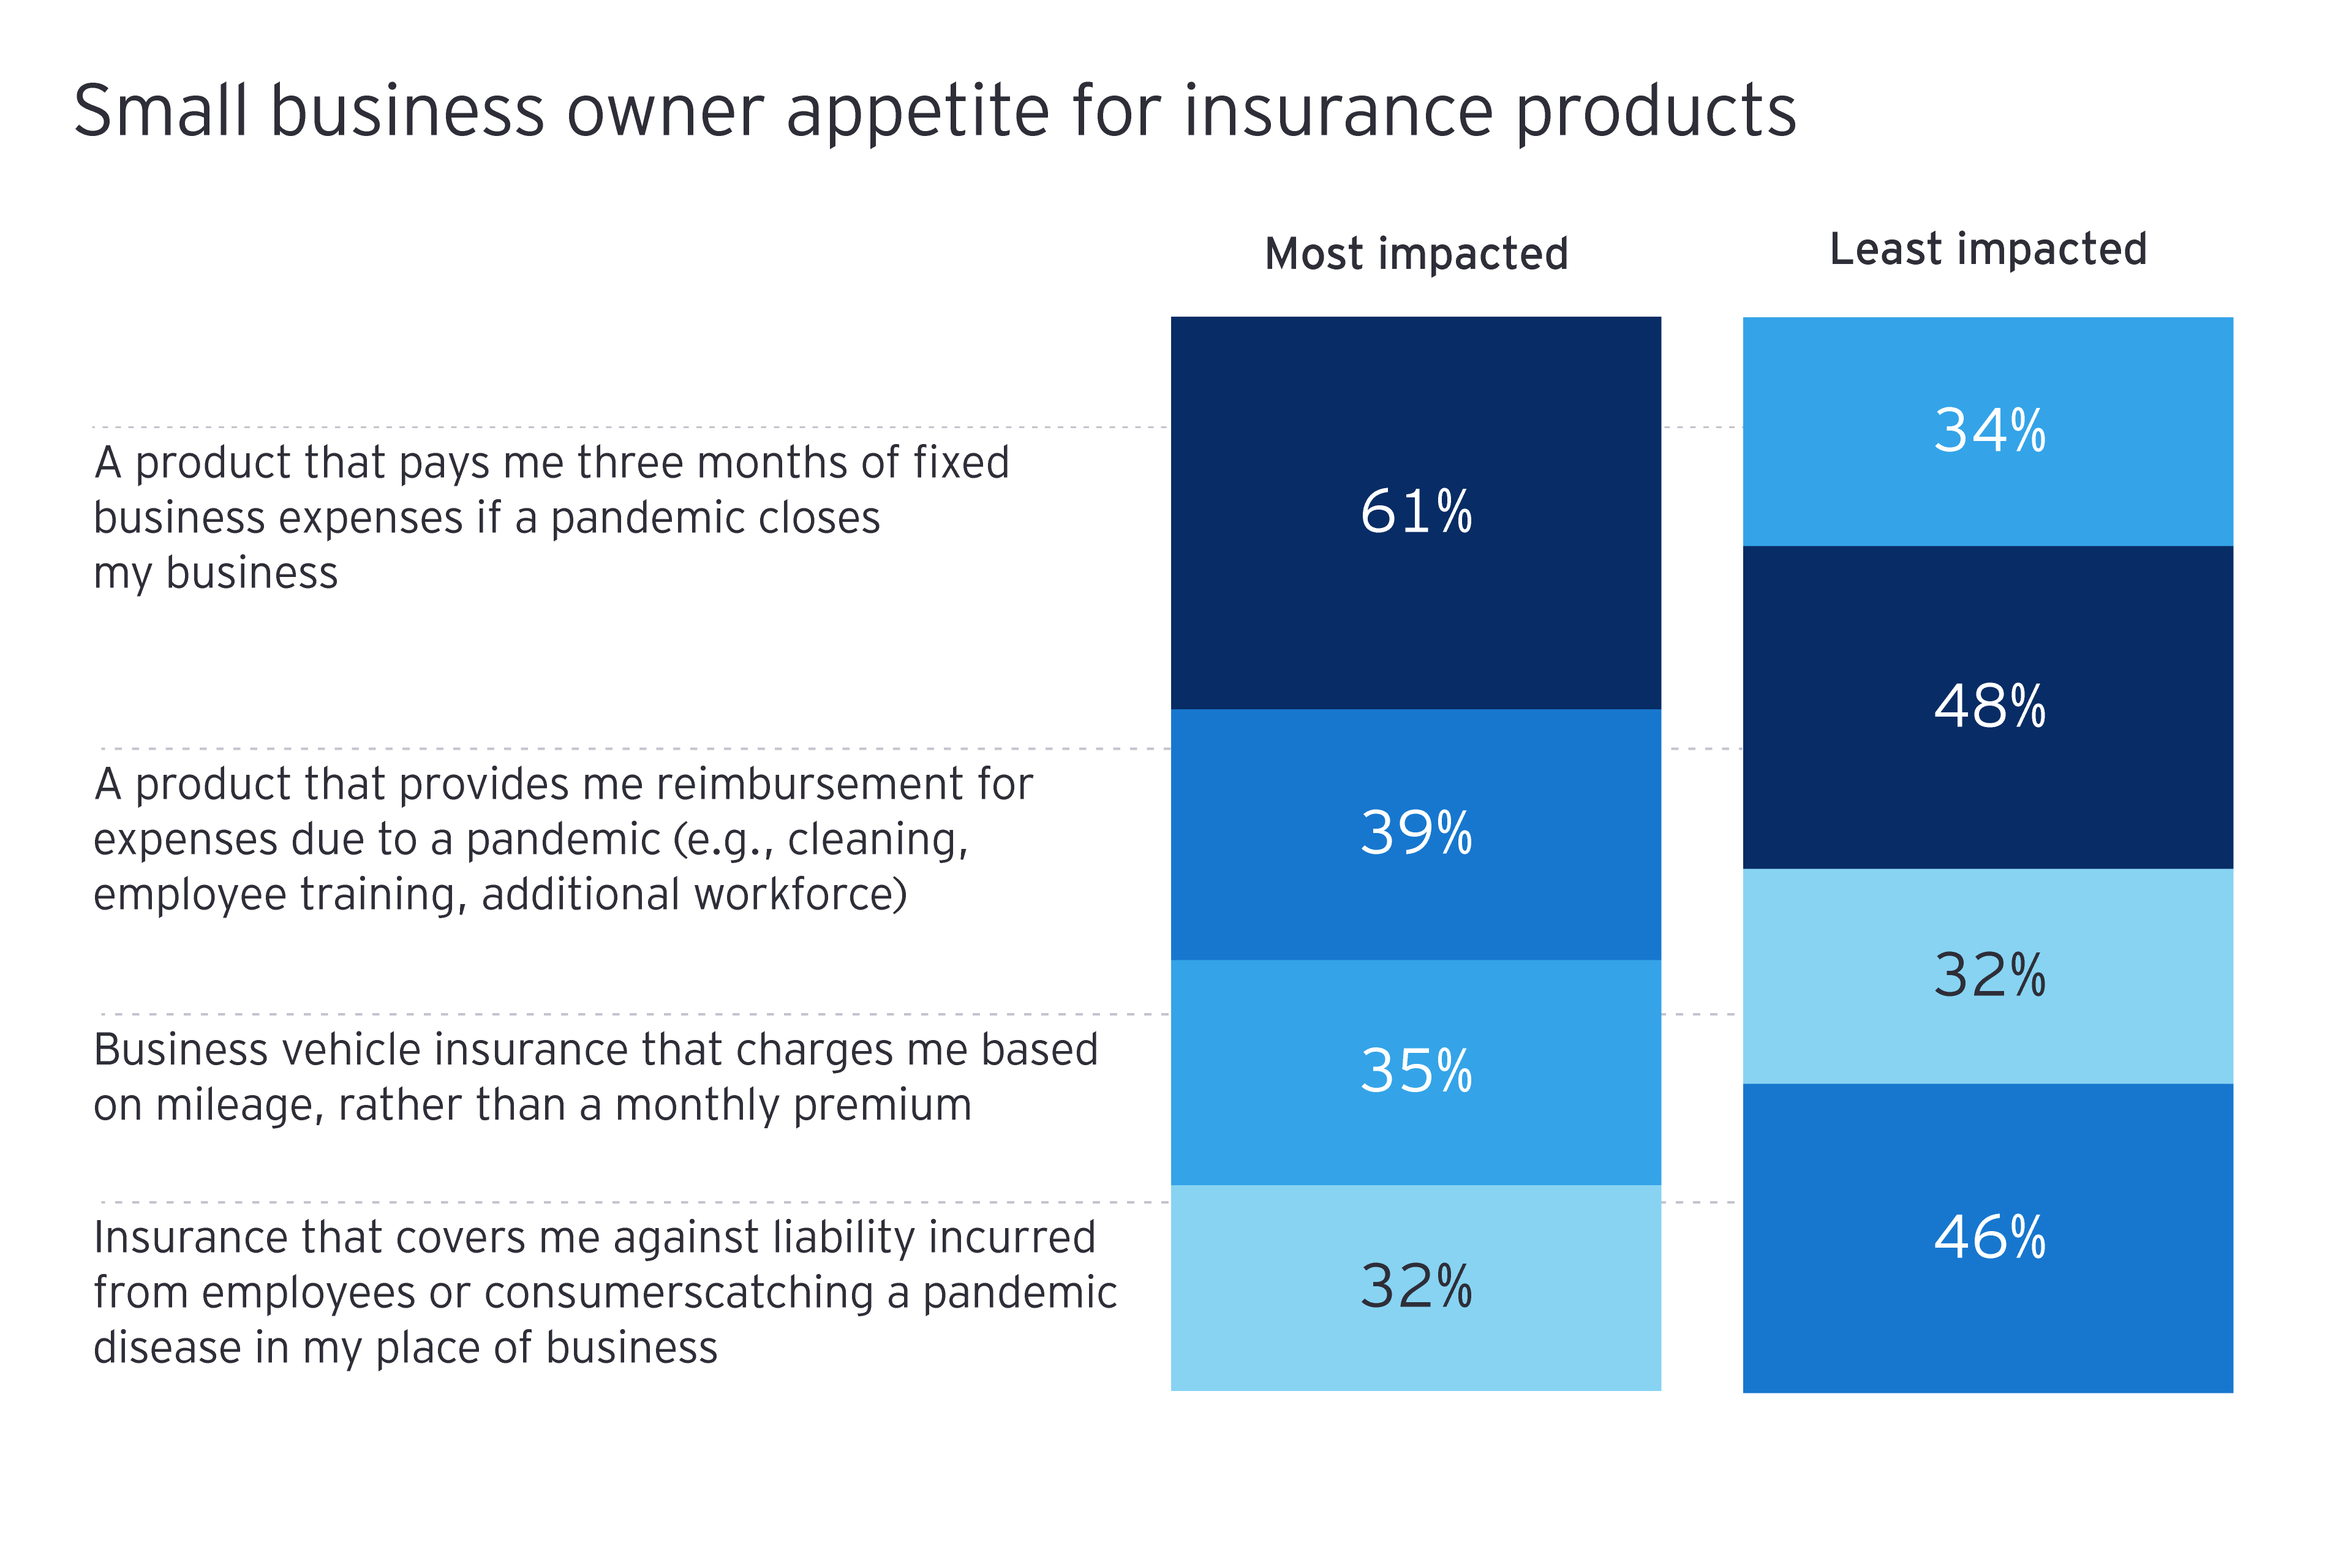 Small business owner appetite for insurance products